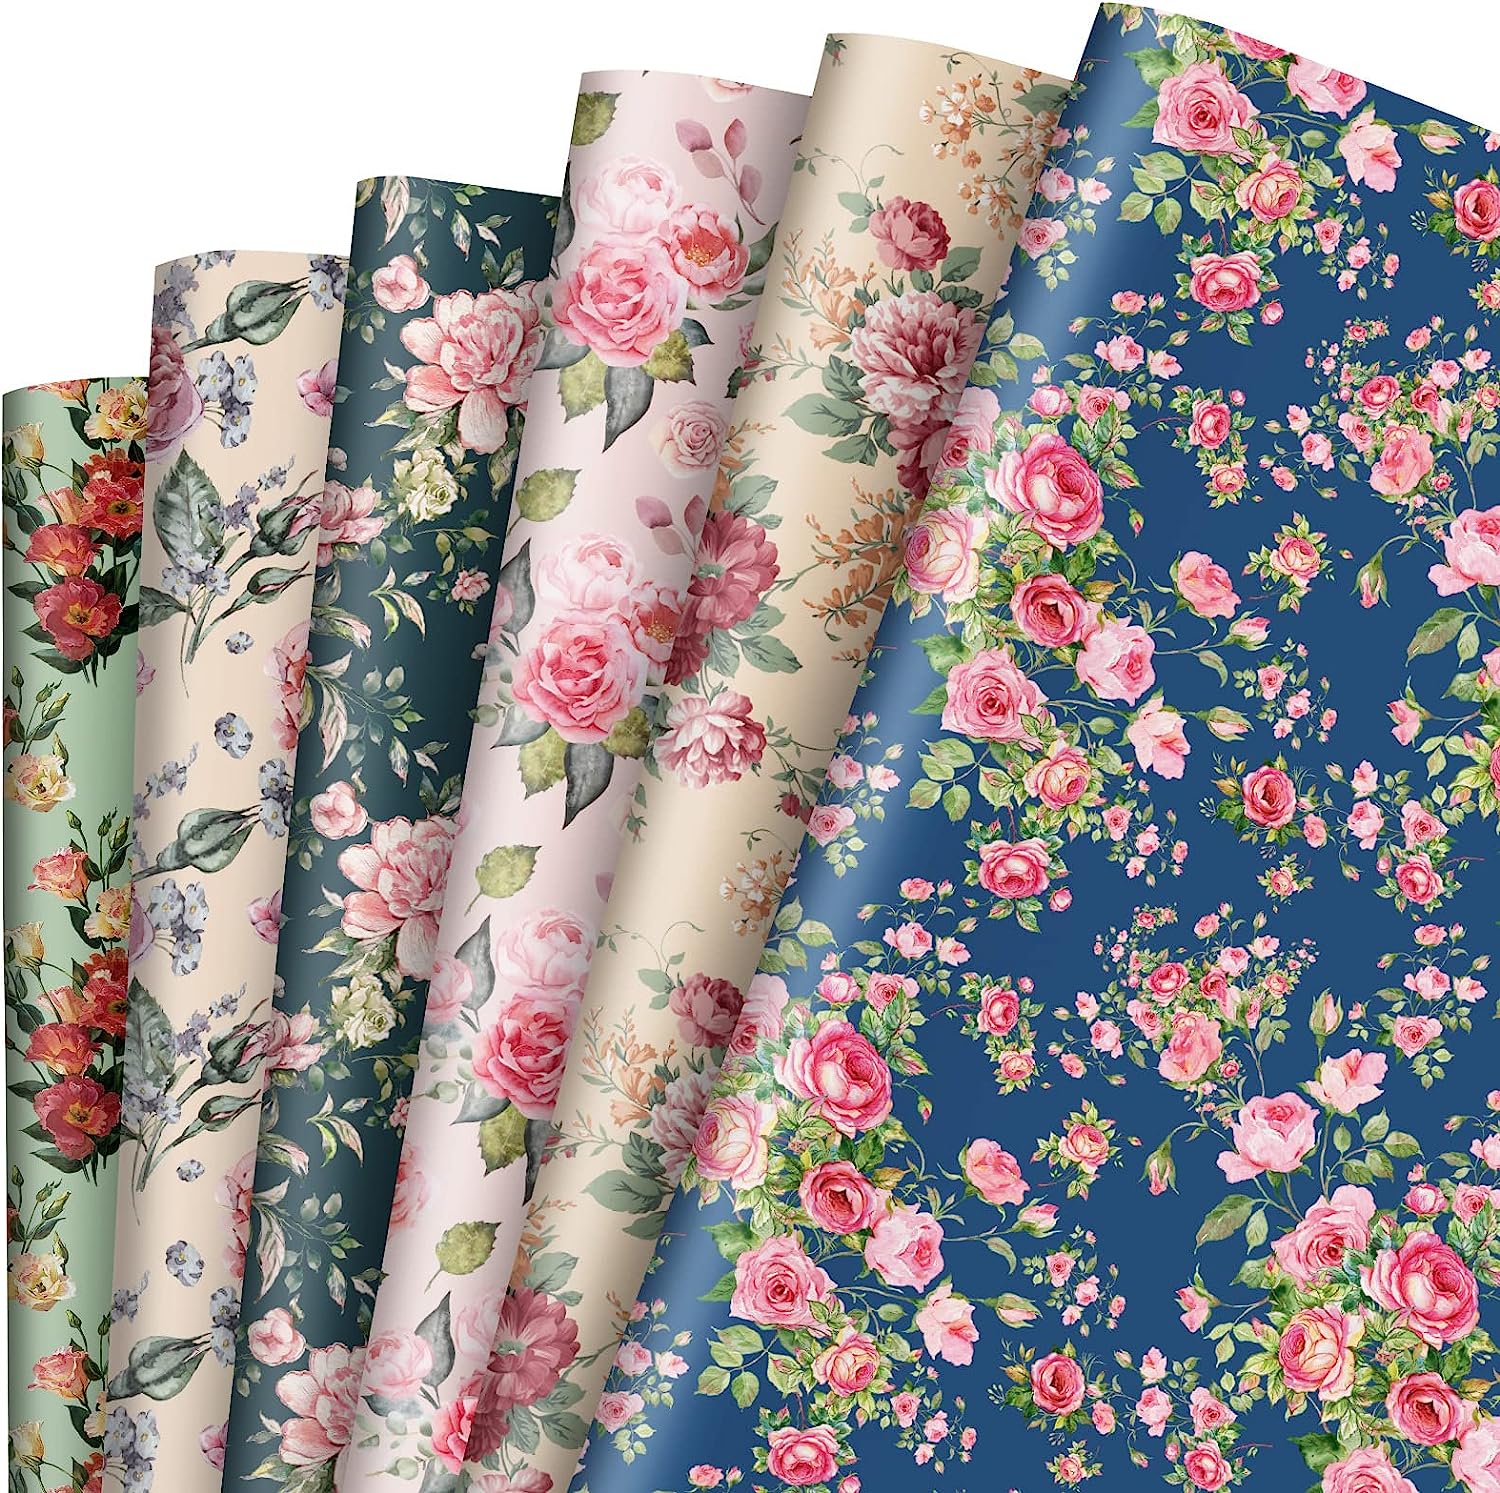  Mimorou 150 Sheets Flower Wrapping Paper for Flower